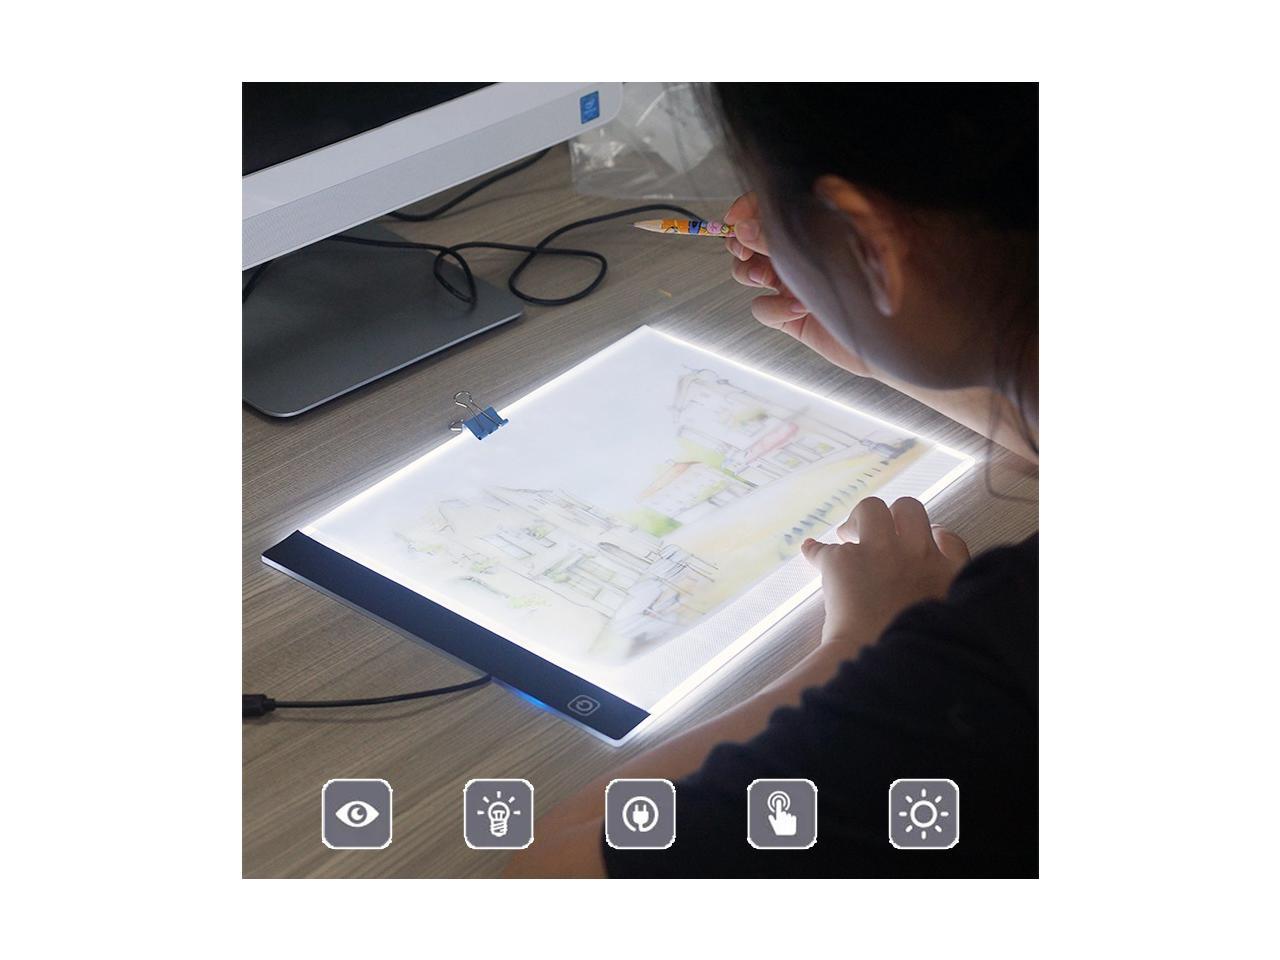 Kenting Magnetic K4M Portable LED Tracing Adjustable Light Pad Light Box Light Table USB Powered Drawing Board Tattoo Pad for Animation Sketching Stenciling X-Ray Viewing Designing Diamond Paint 